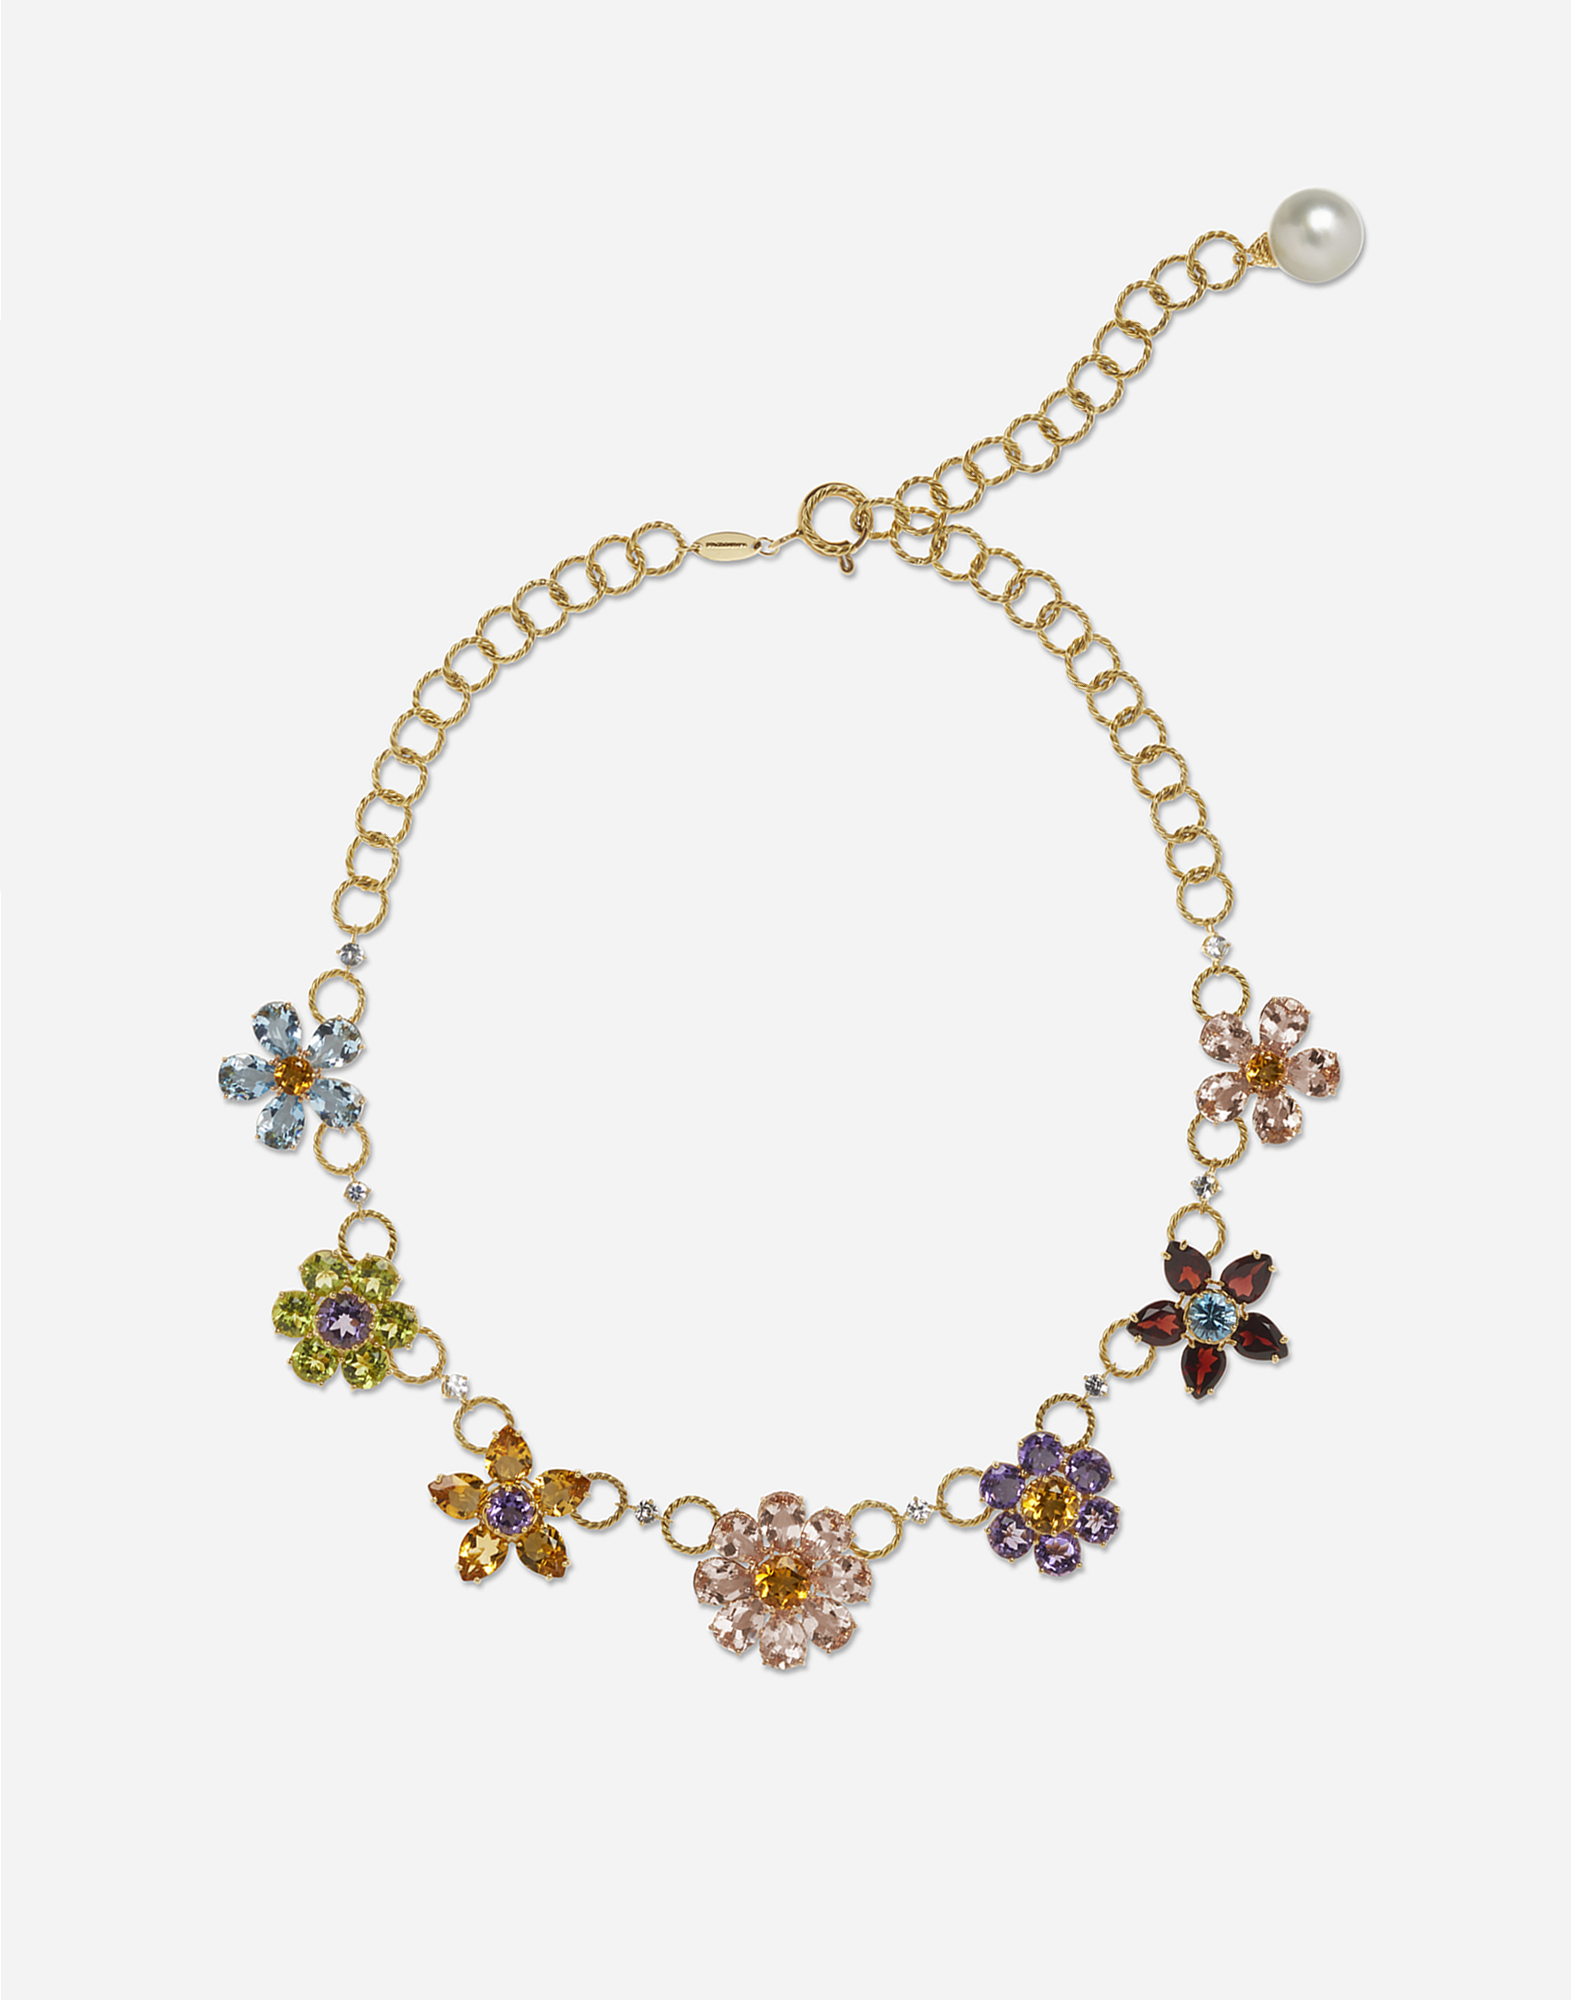 Necklace with floral decorative elements in Gold